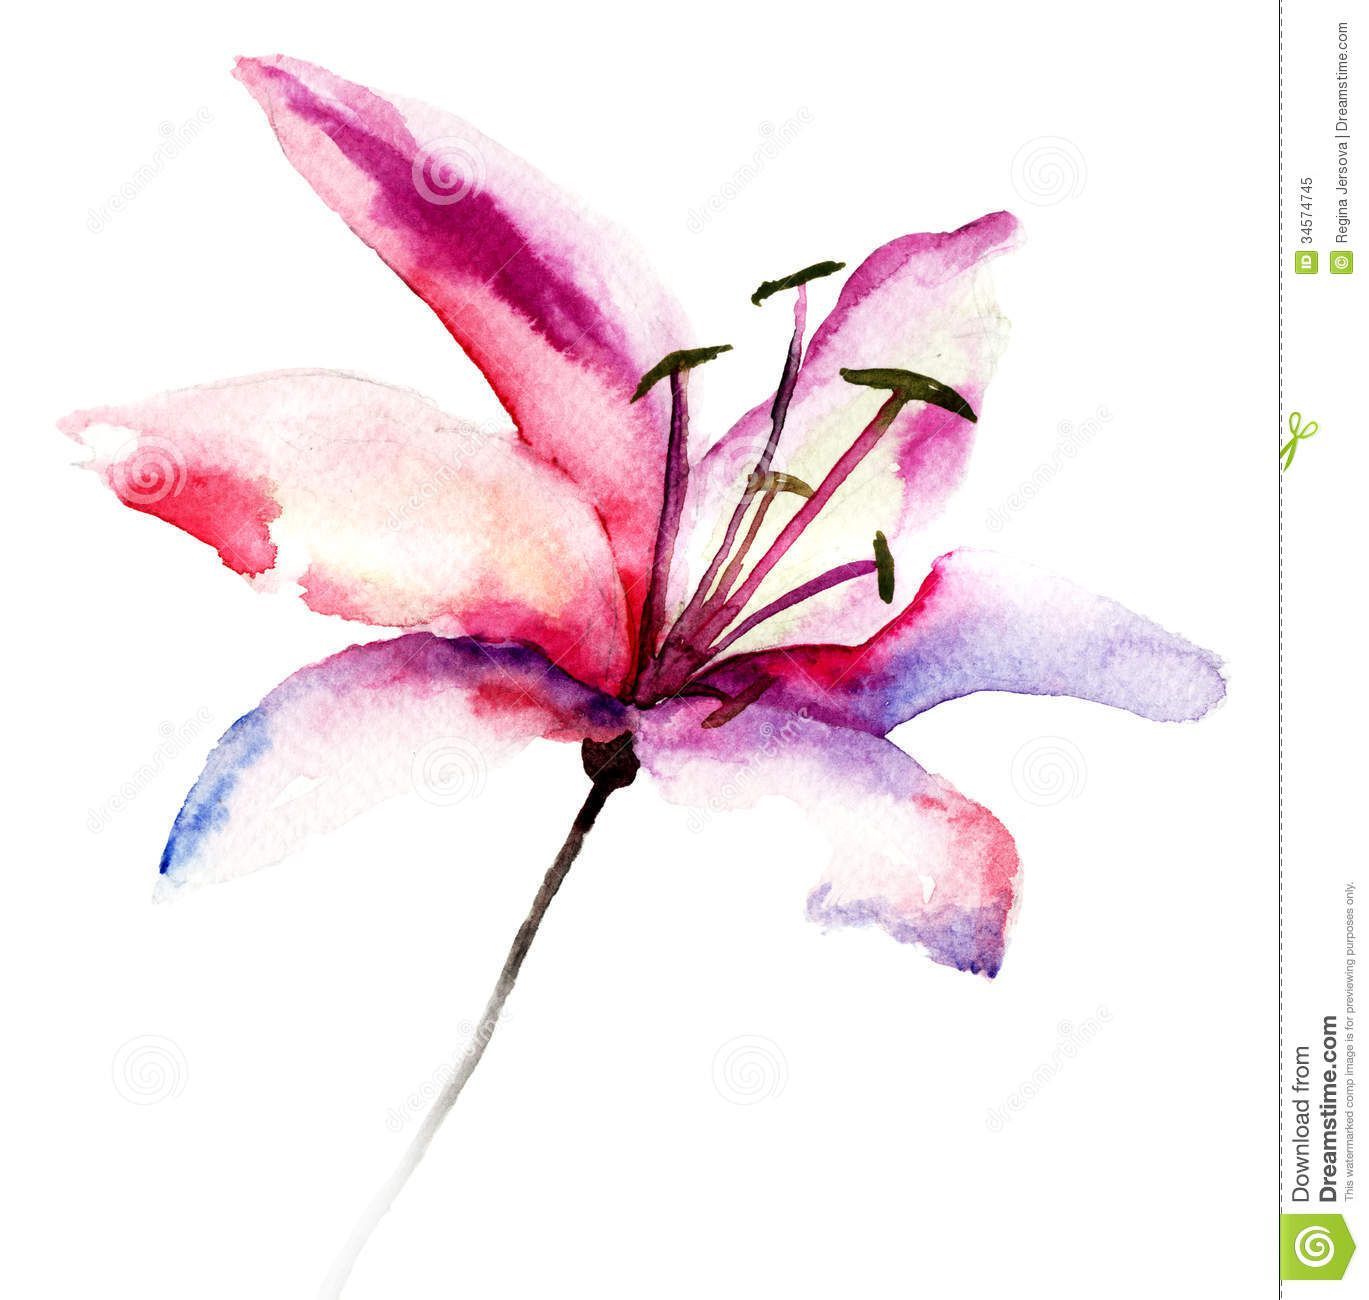 Beautiful Lily Flowers - Download From Over 41 Million High Quality Stock Photos, Images, Vectors. Sign up for FREE today. Image: 34574745 -   19 watercolor tattoo lily
 ideas